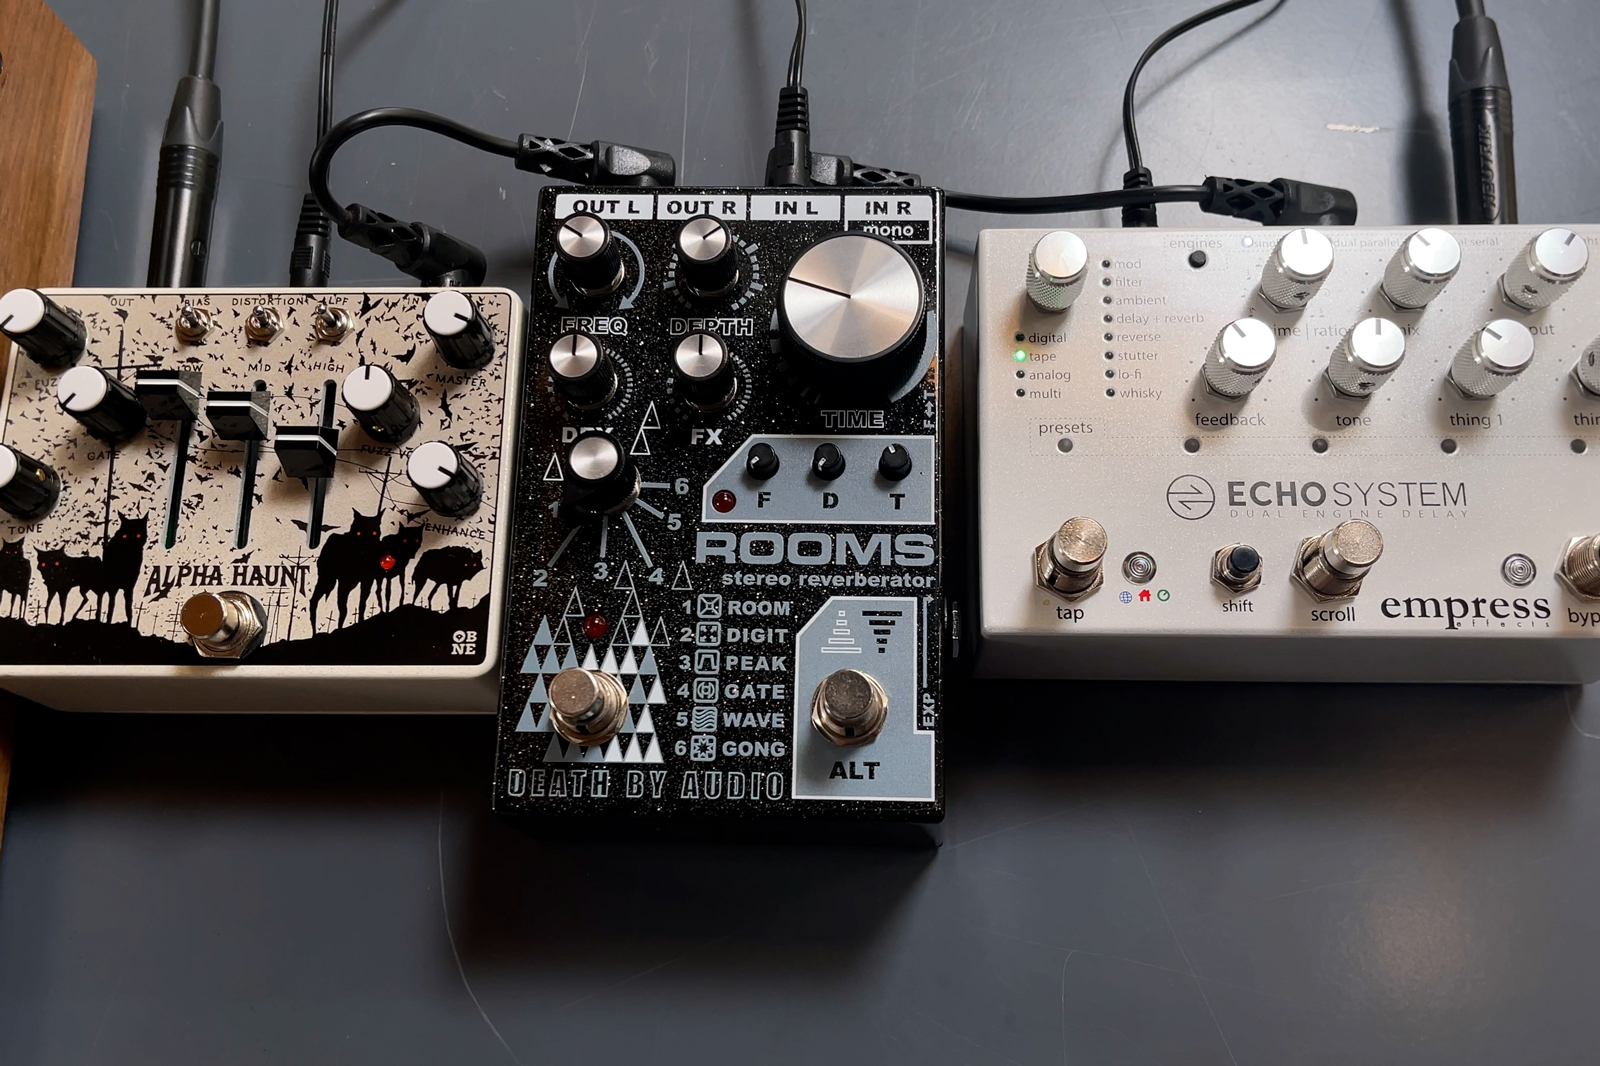 This chain of effects is inspired by the sound of Kevin Shields (My Bloody Valentine) 